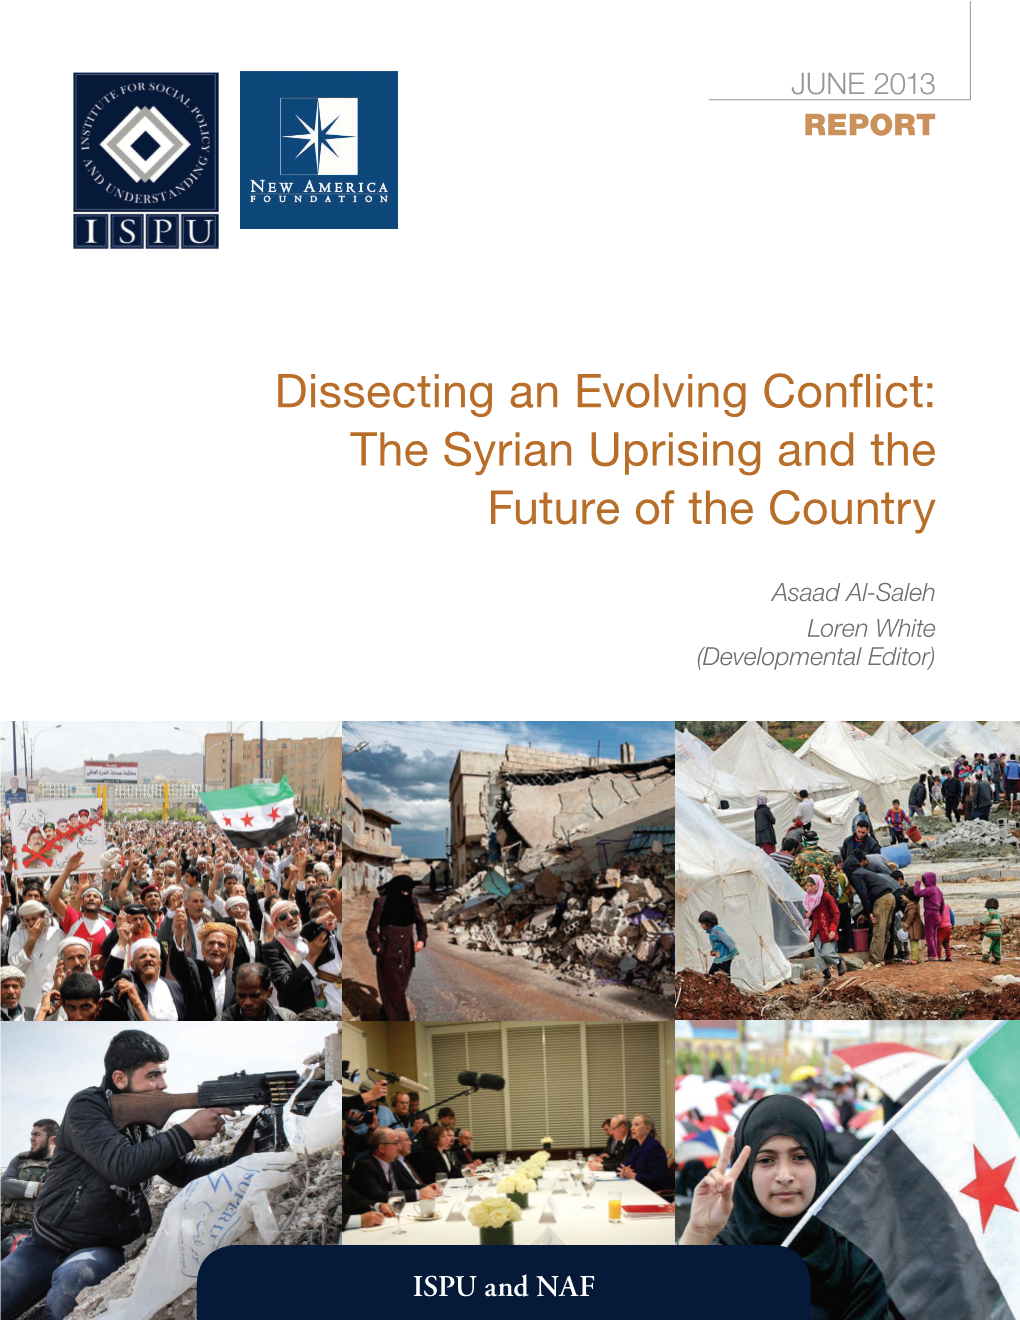 Dissecting an Evolving Conflict: the Syrian Uprising and the Future of the Country